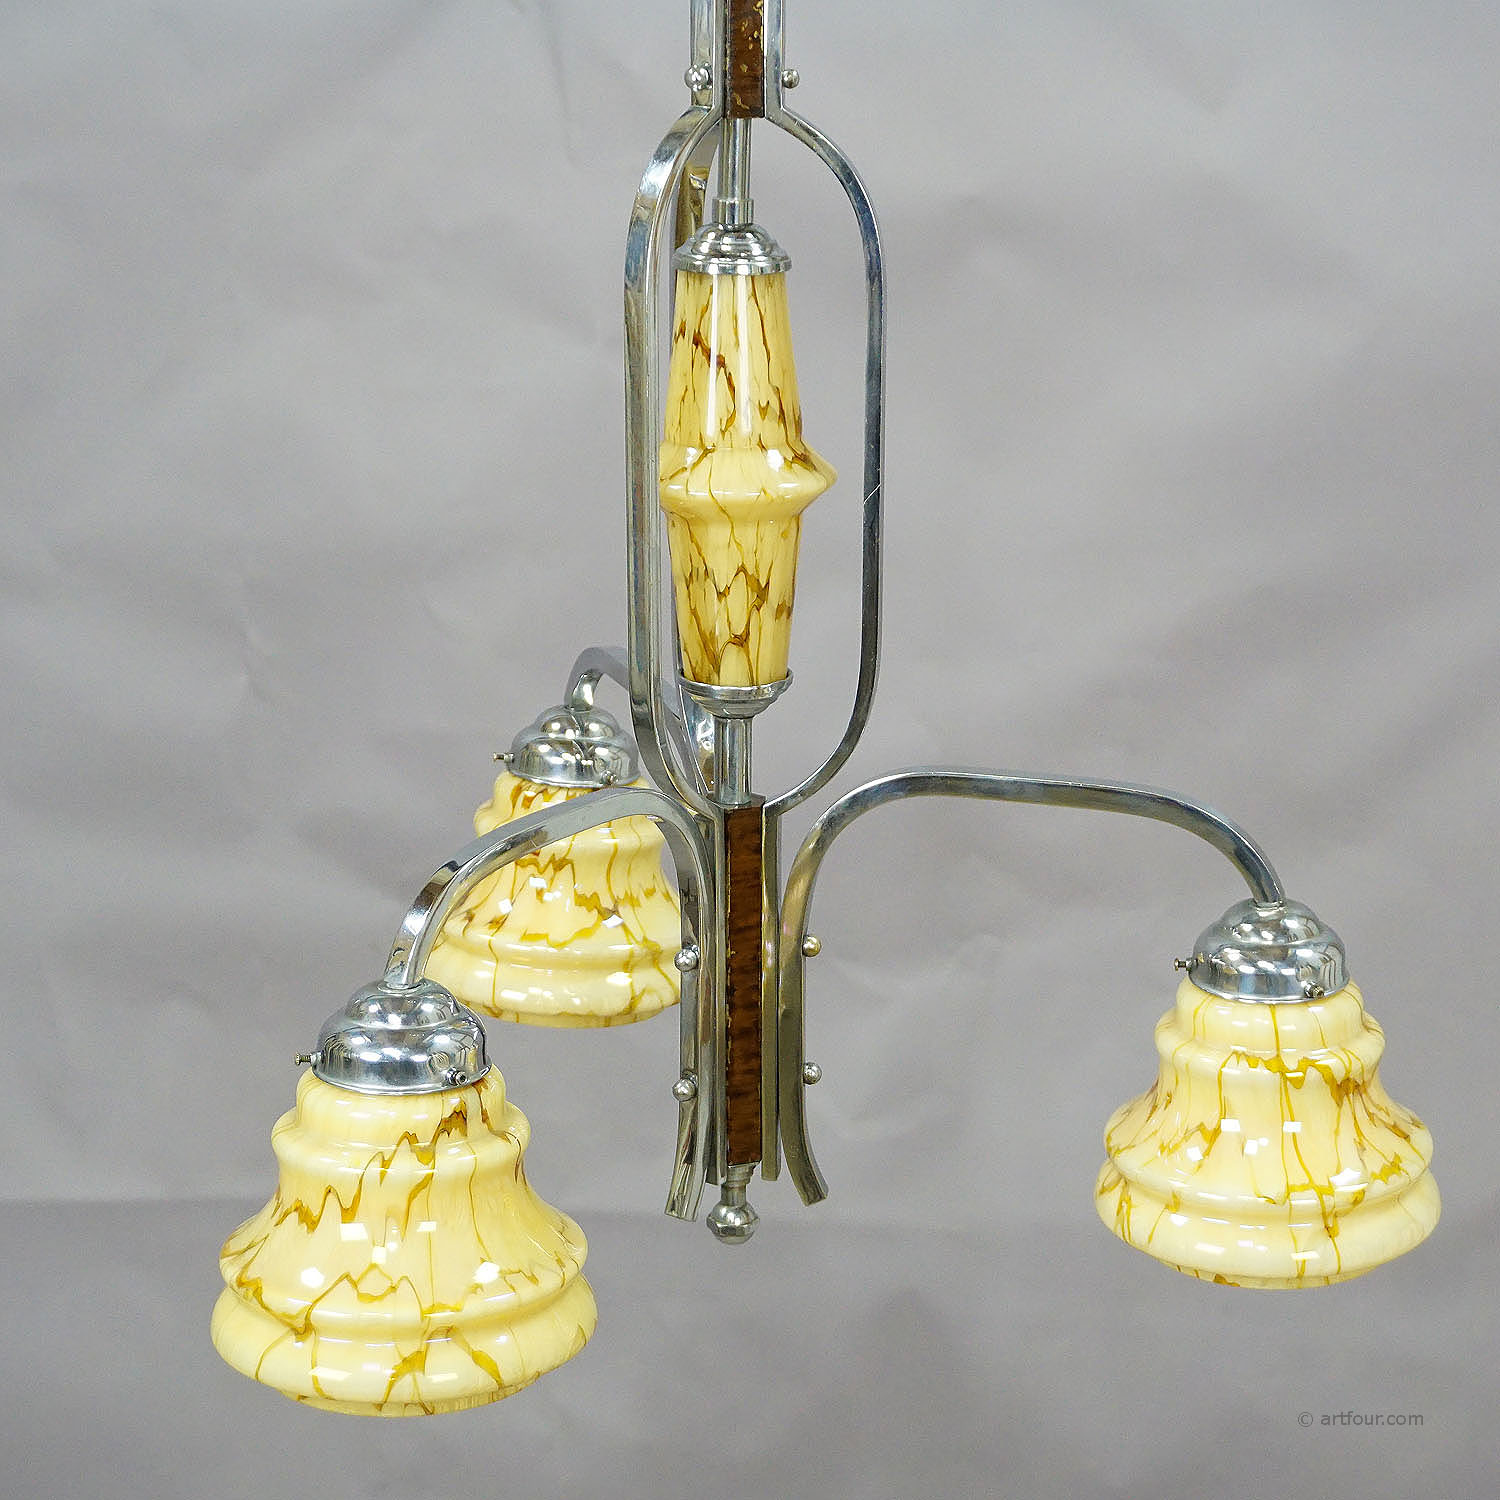 Antique Art Deco Chandelier with Three Glass Shades